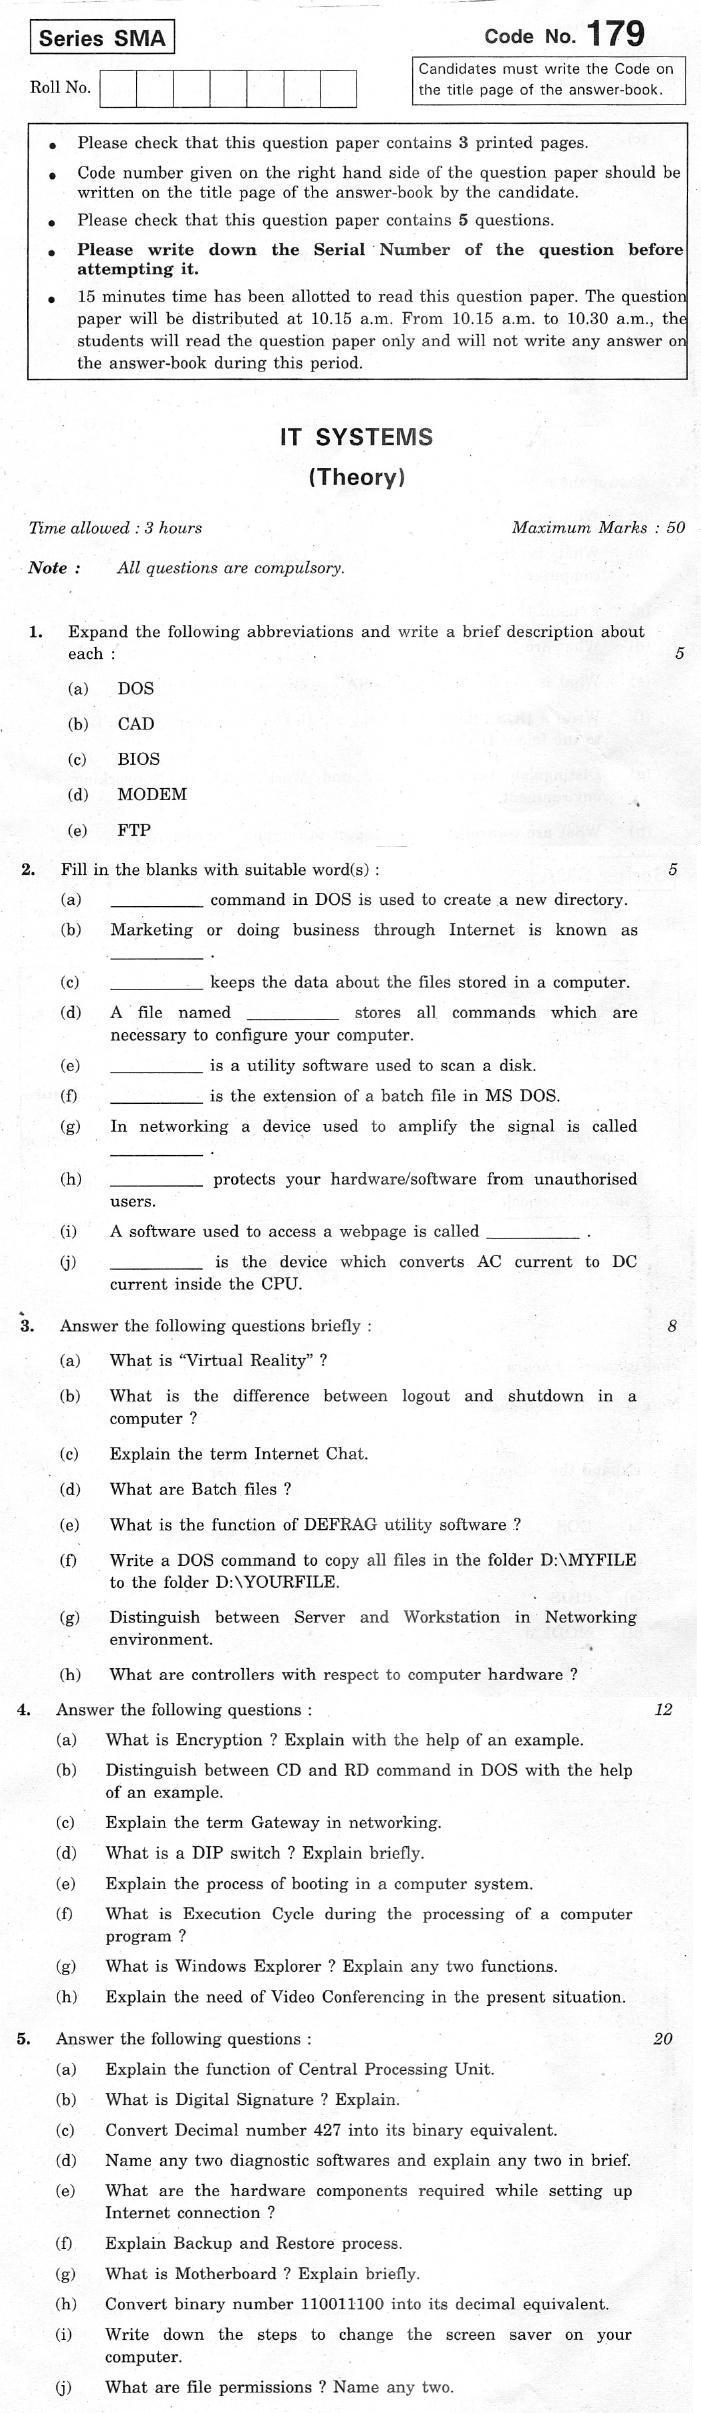 CBSE Class XII Previous Year Question Paper 2012 IT Systems